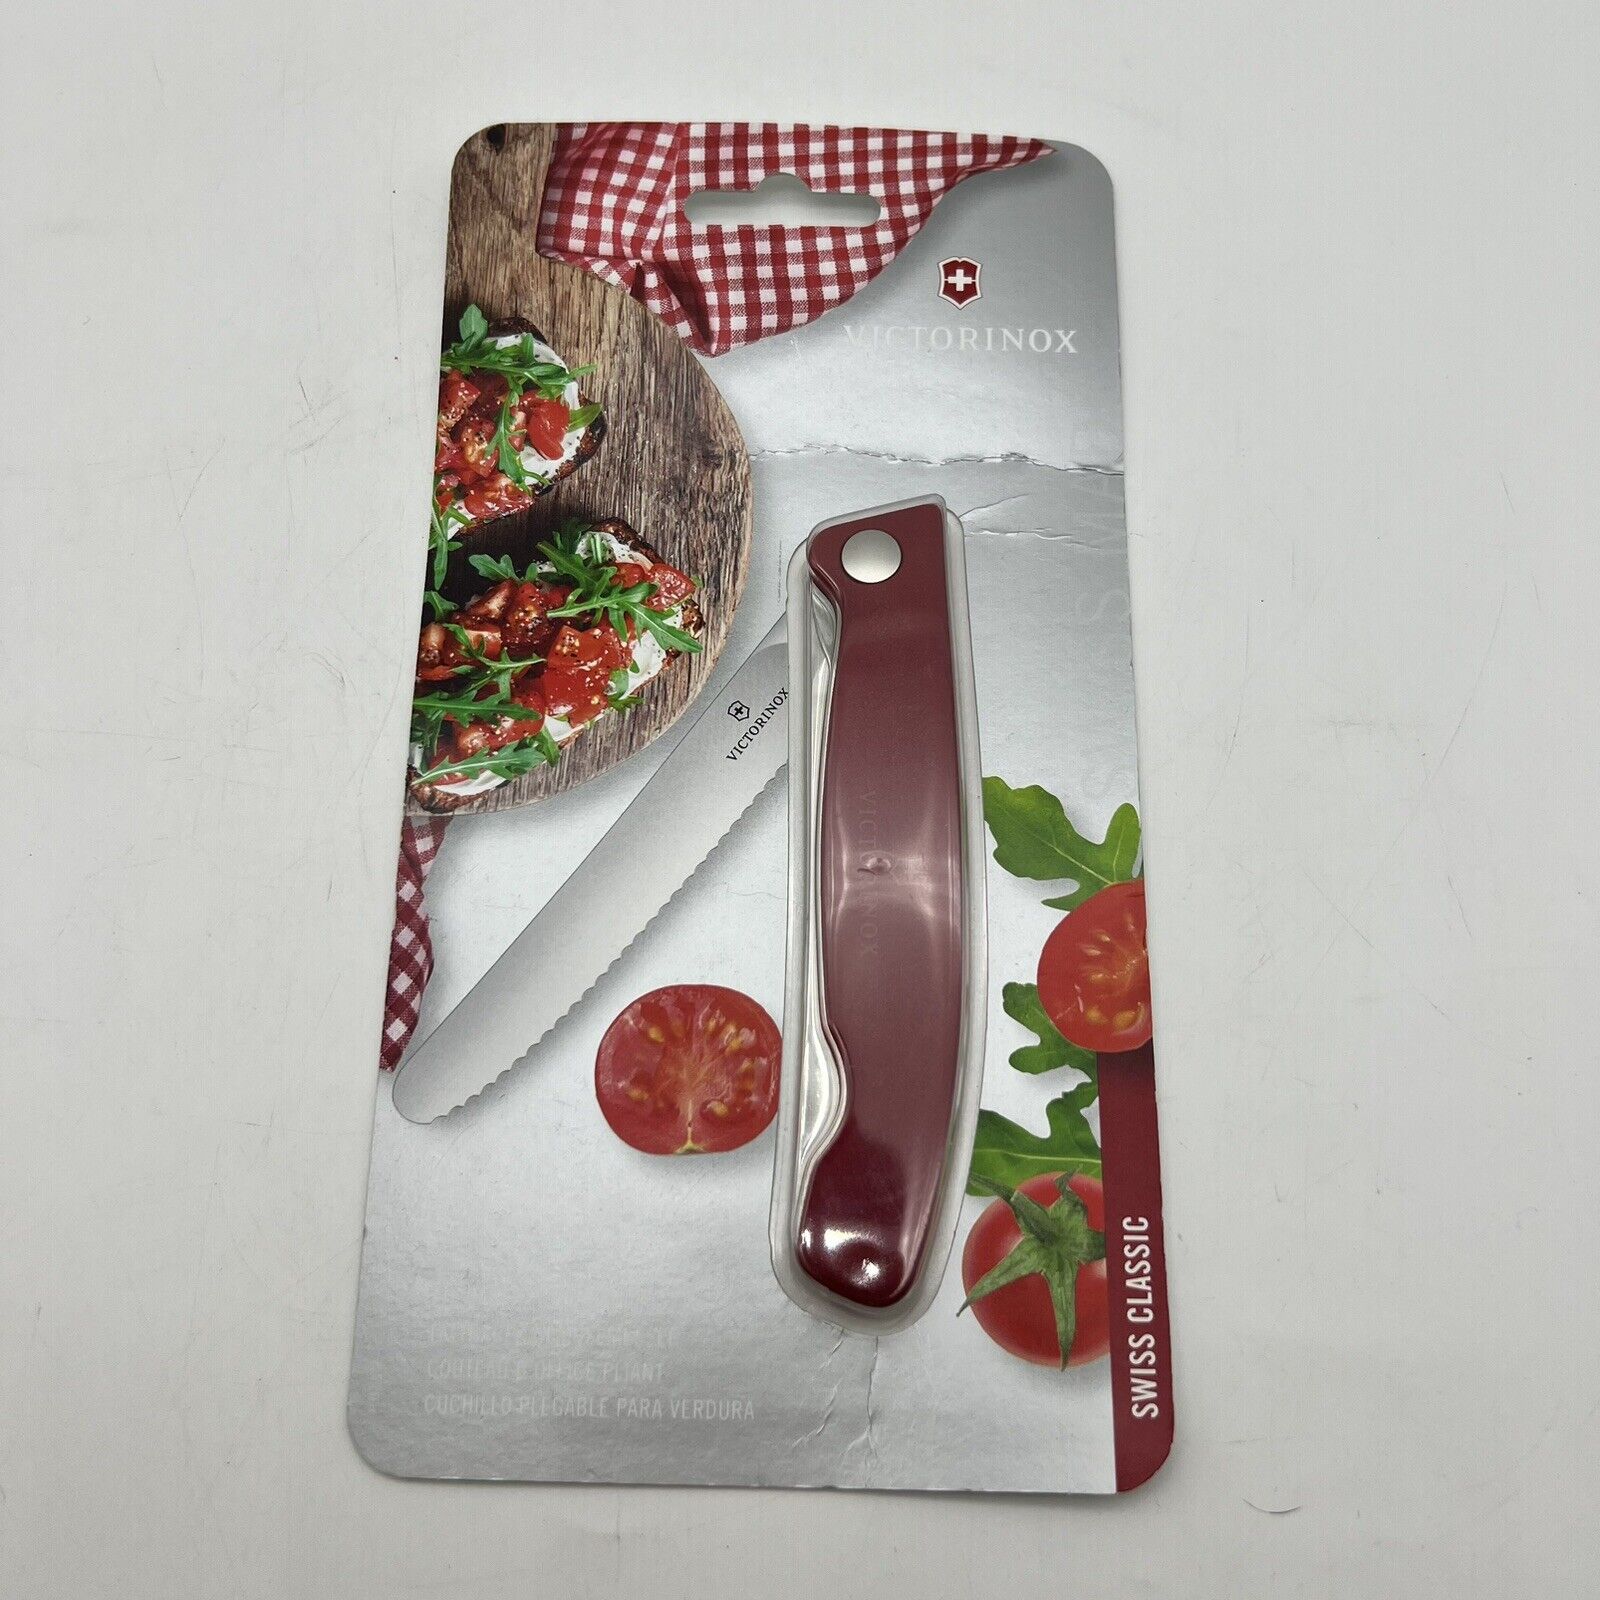 Victorinox Swiss Classic Foldable Paring Knife Red 11cm Swiss Compact Portable